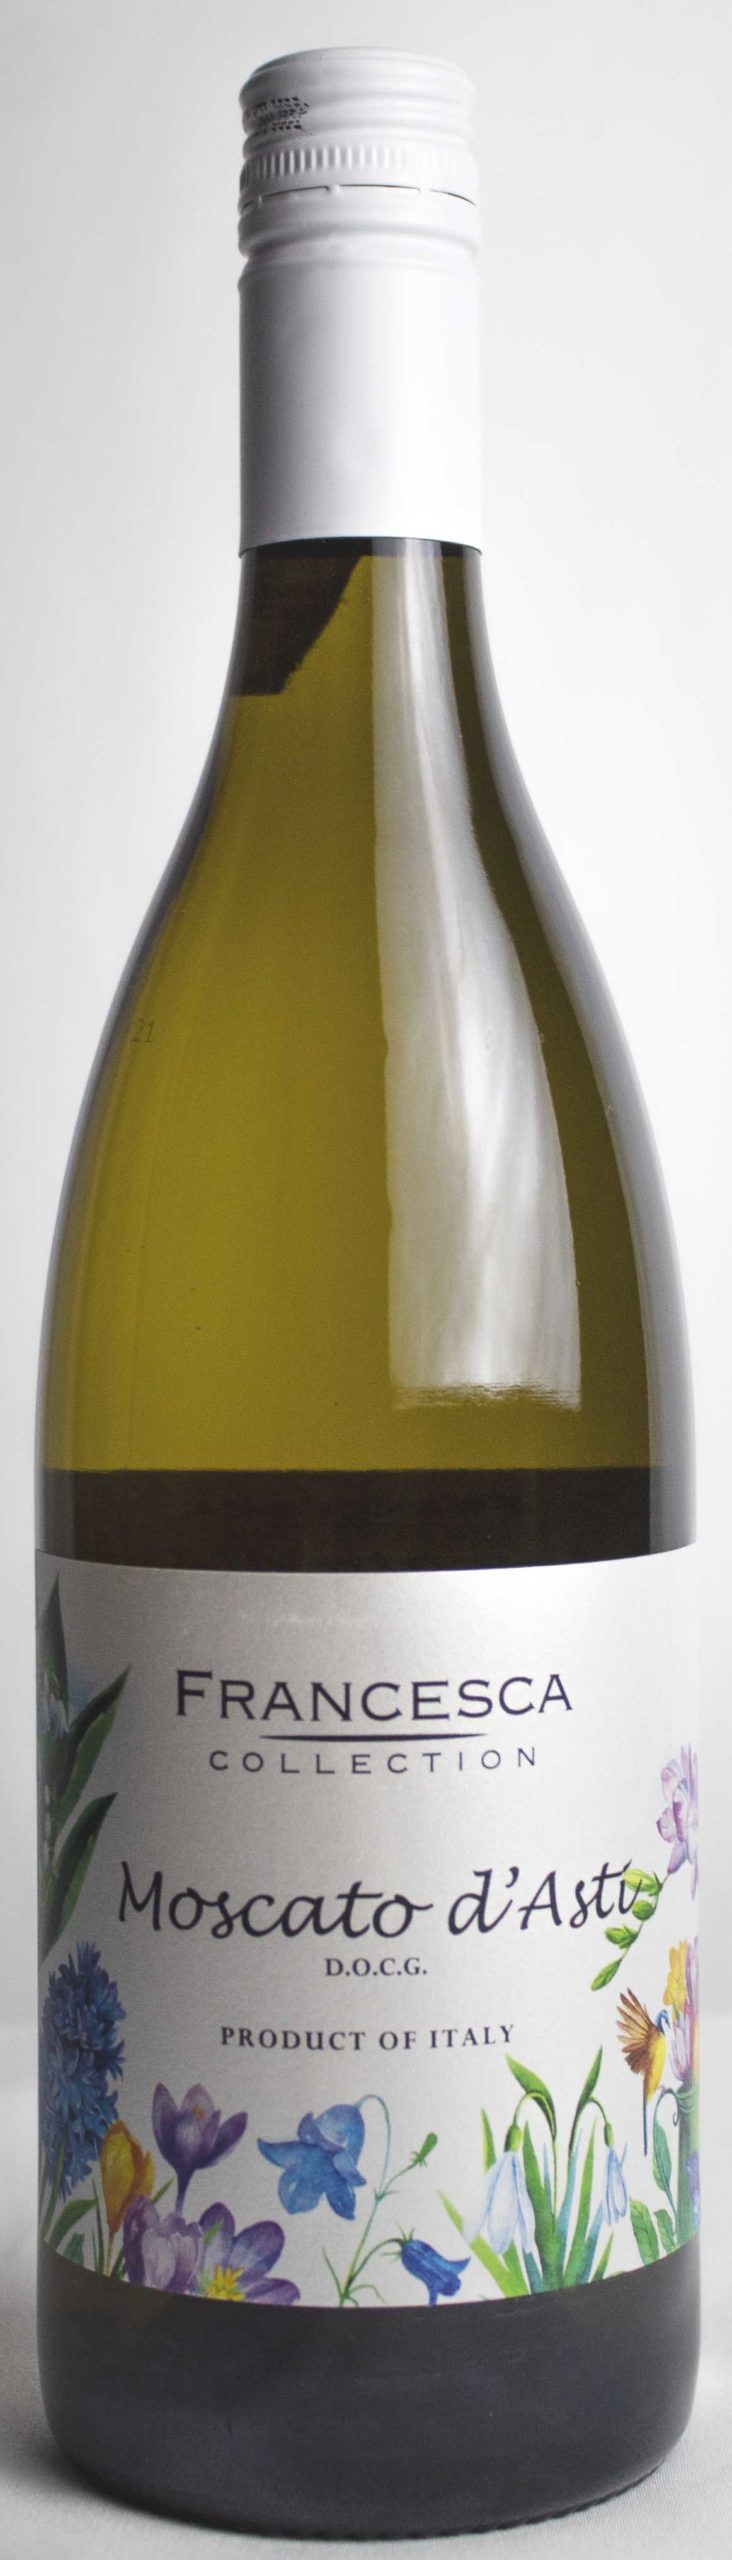 Product Image for Francesca Moscato